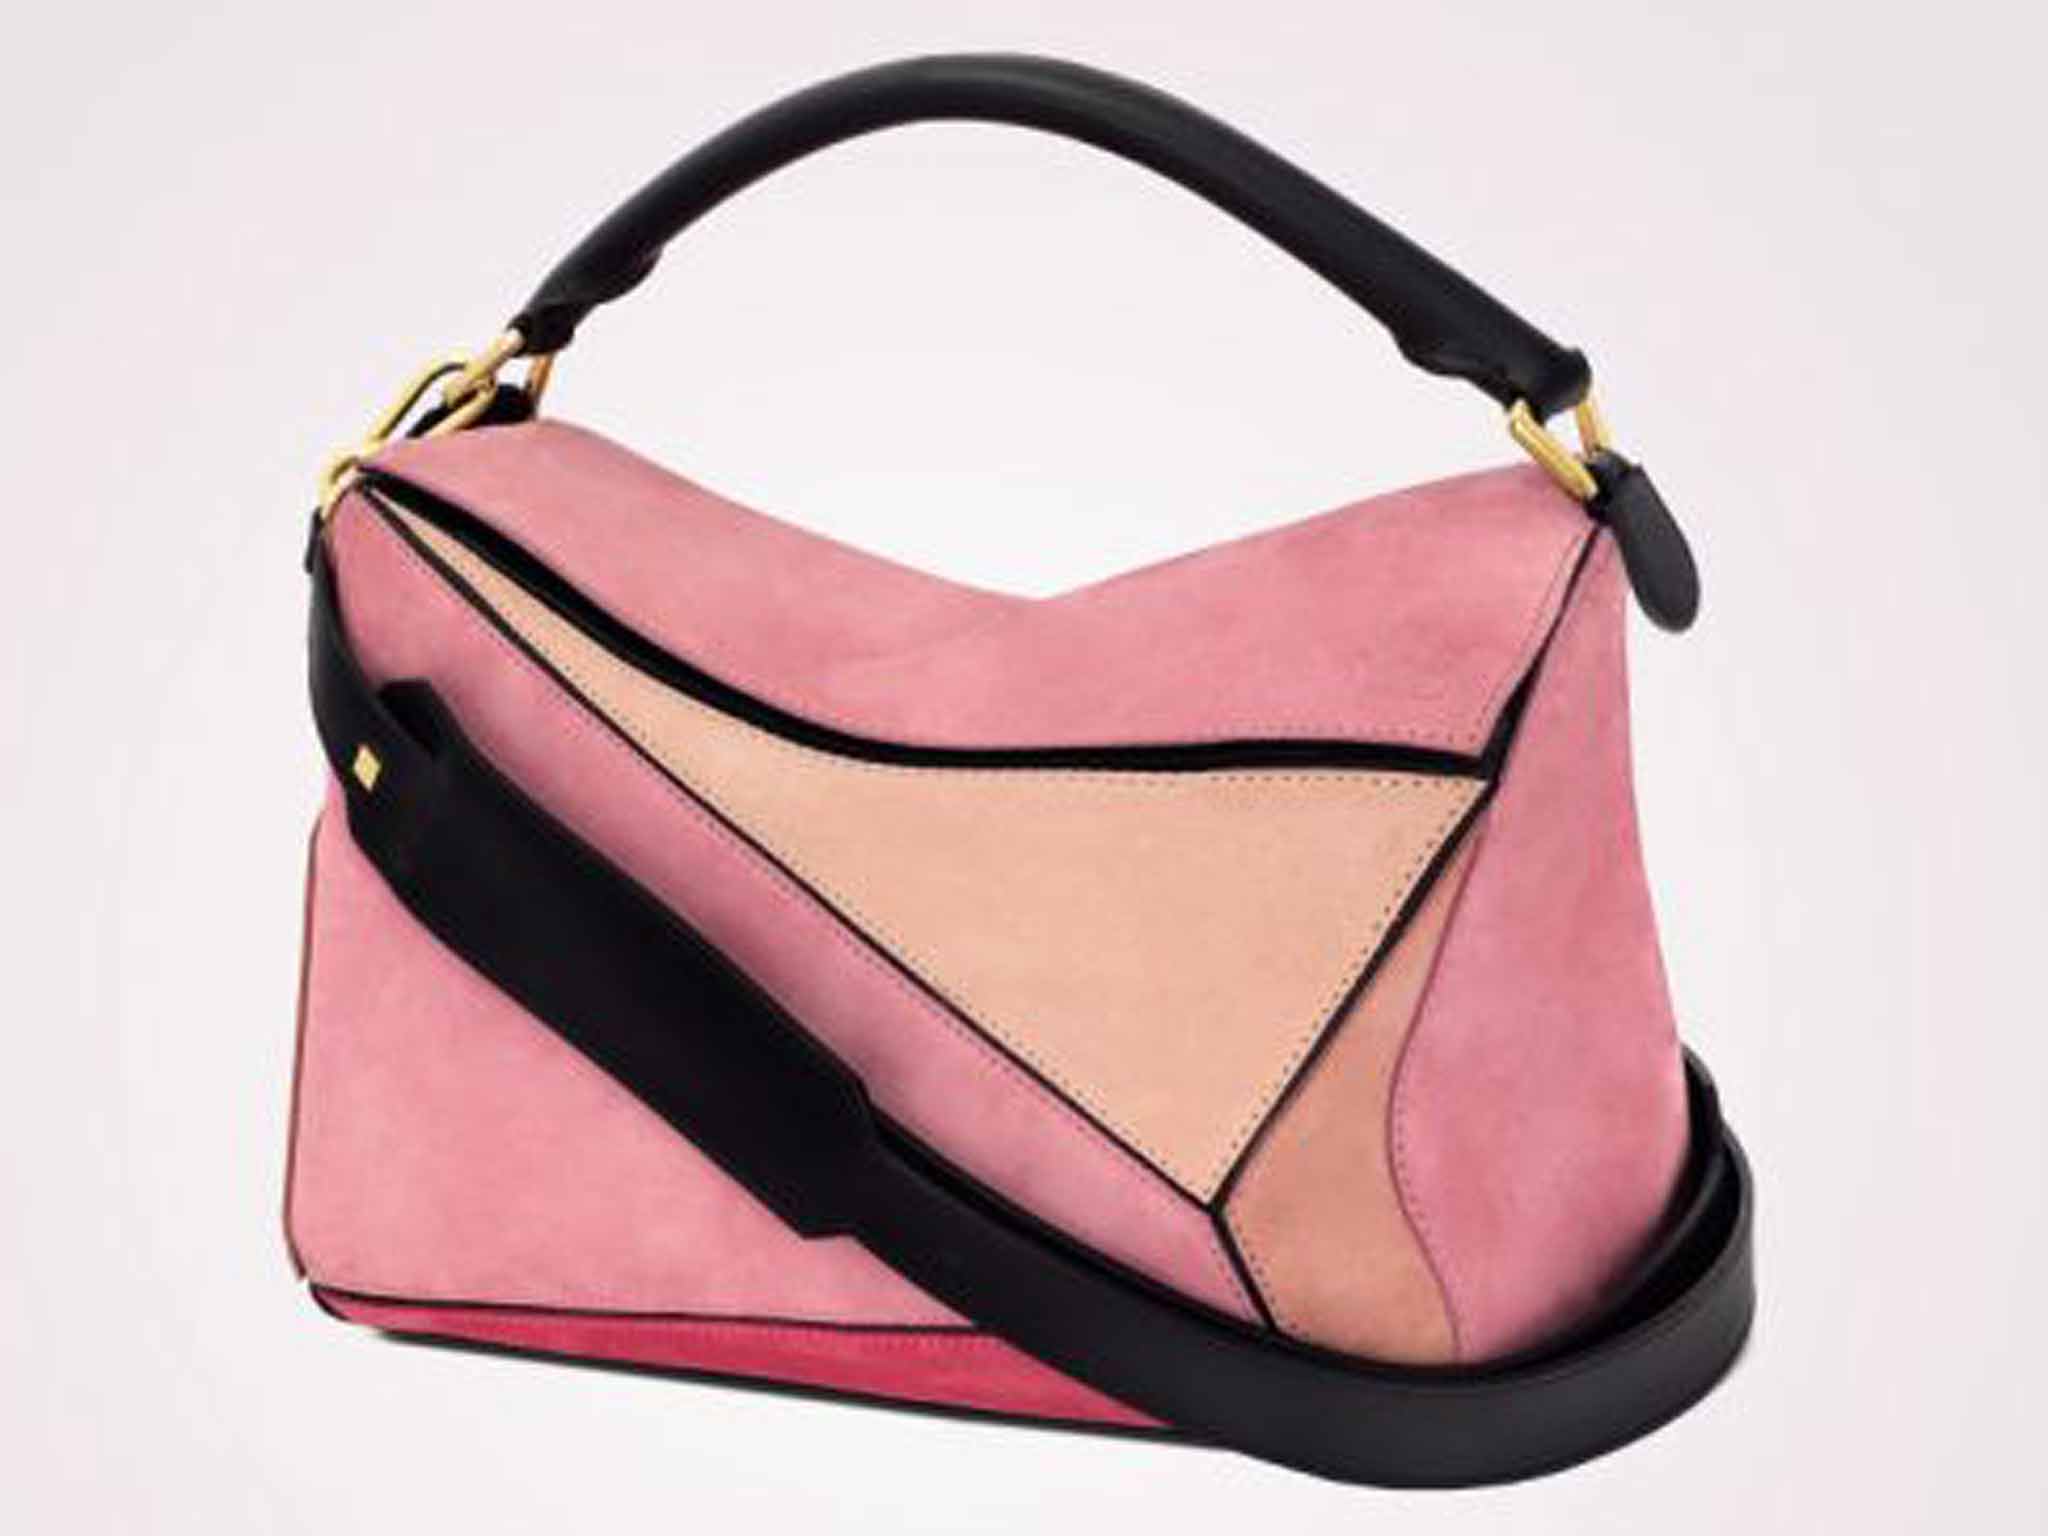 Object of desire: the Loewe 'Puzzle' bag